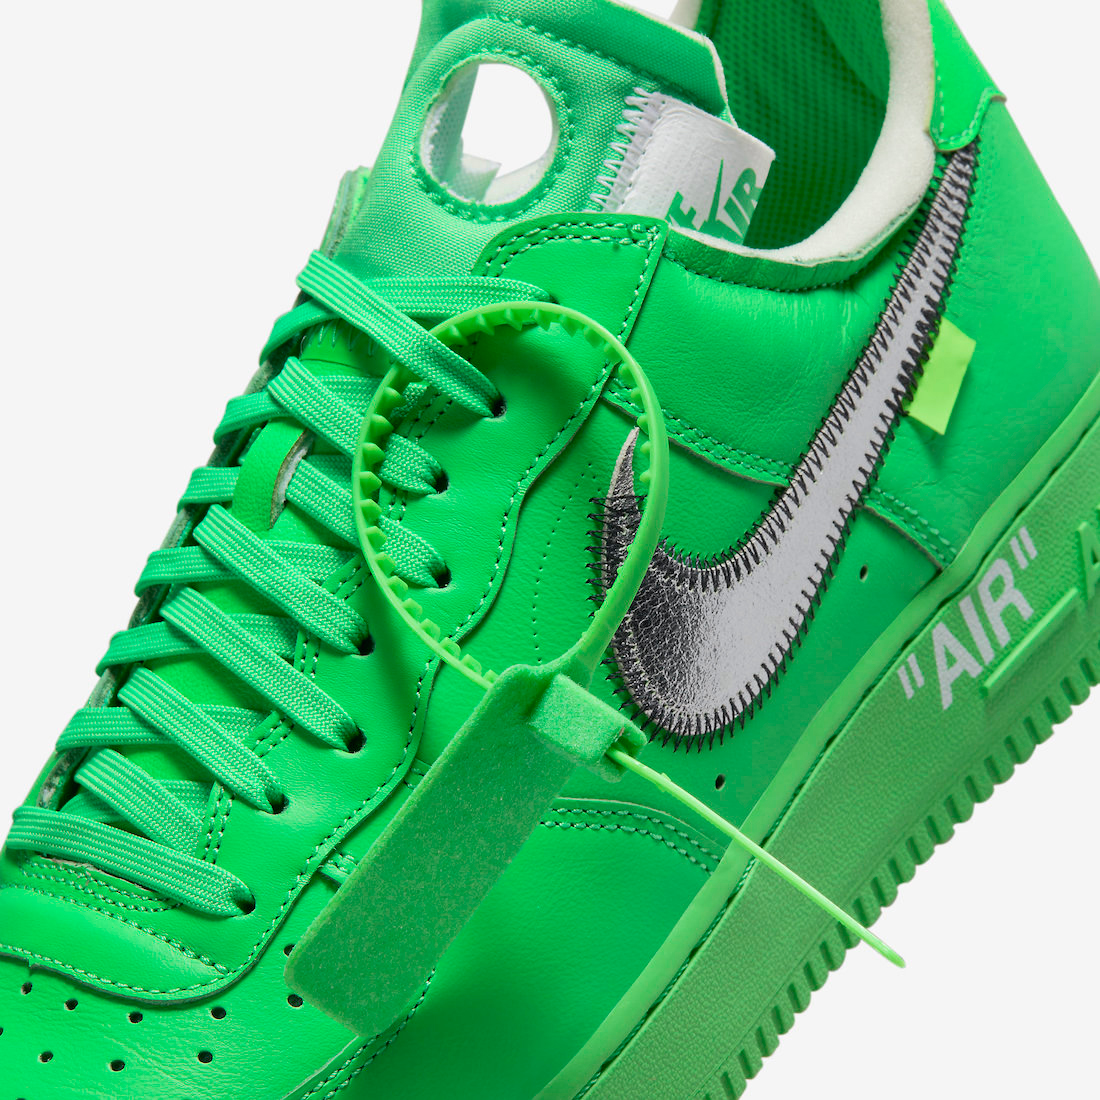 off-white-nike-air-force-1-brooklyn-light-green-spark-release-date-9